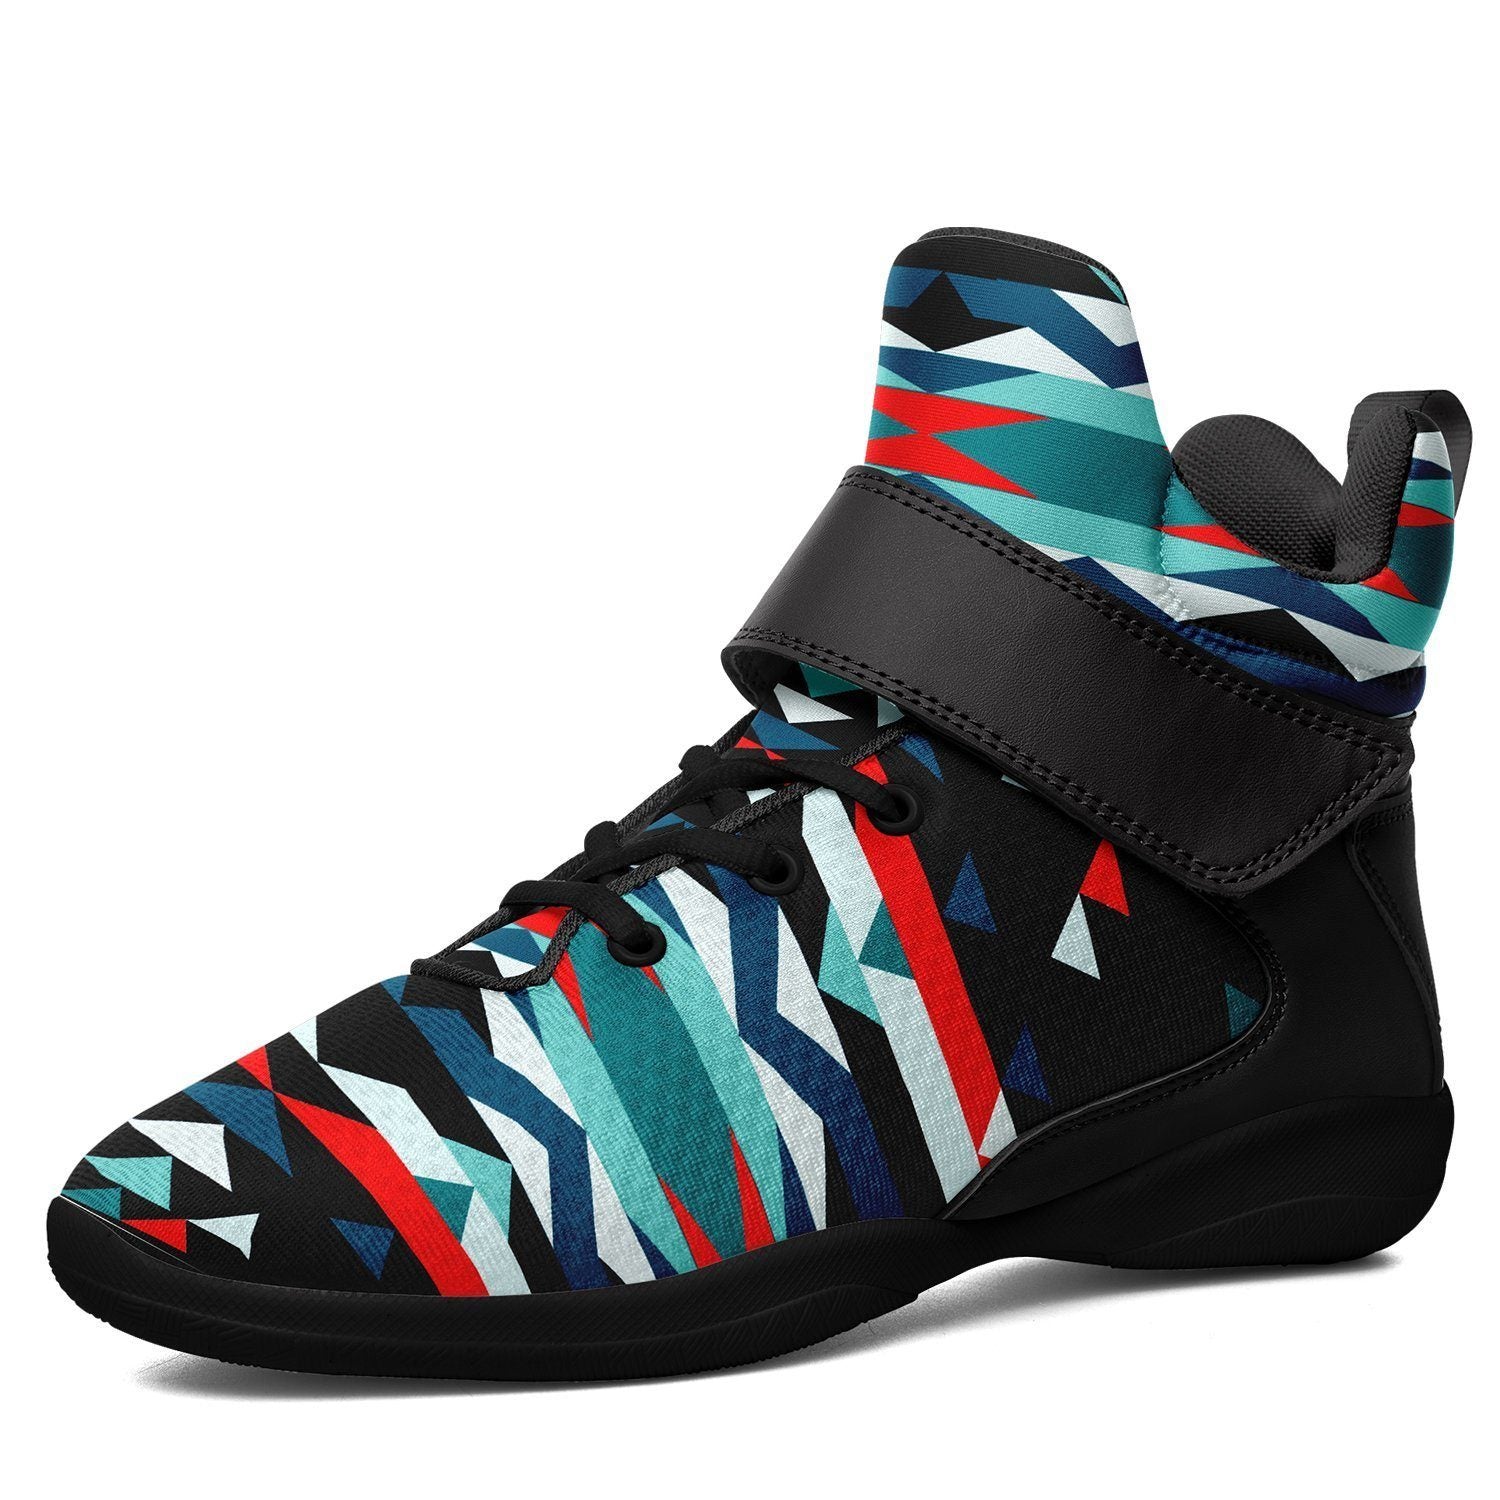 Visions of Peaceful Nights Ipottaa Basketball / Sport High Top Shoes - Black Sole 49 Dzine US Men 7 / EUR 40 Black Sole with Black Strap 